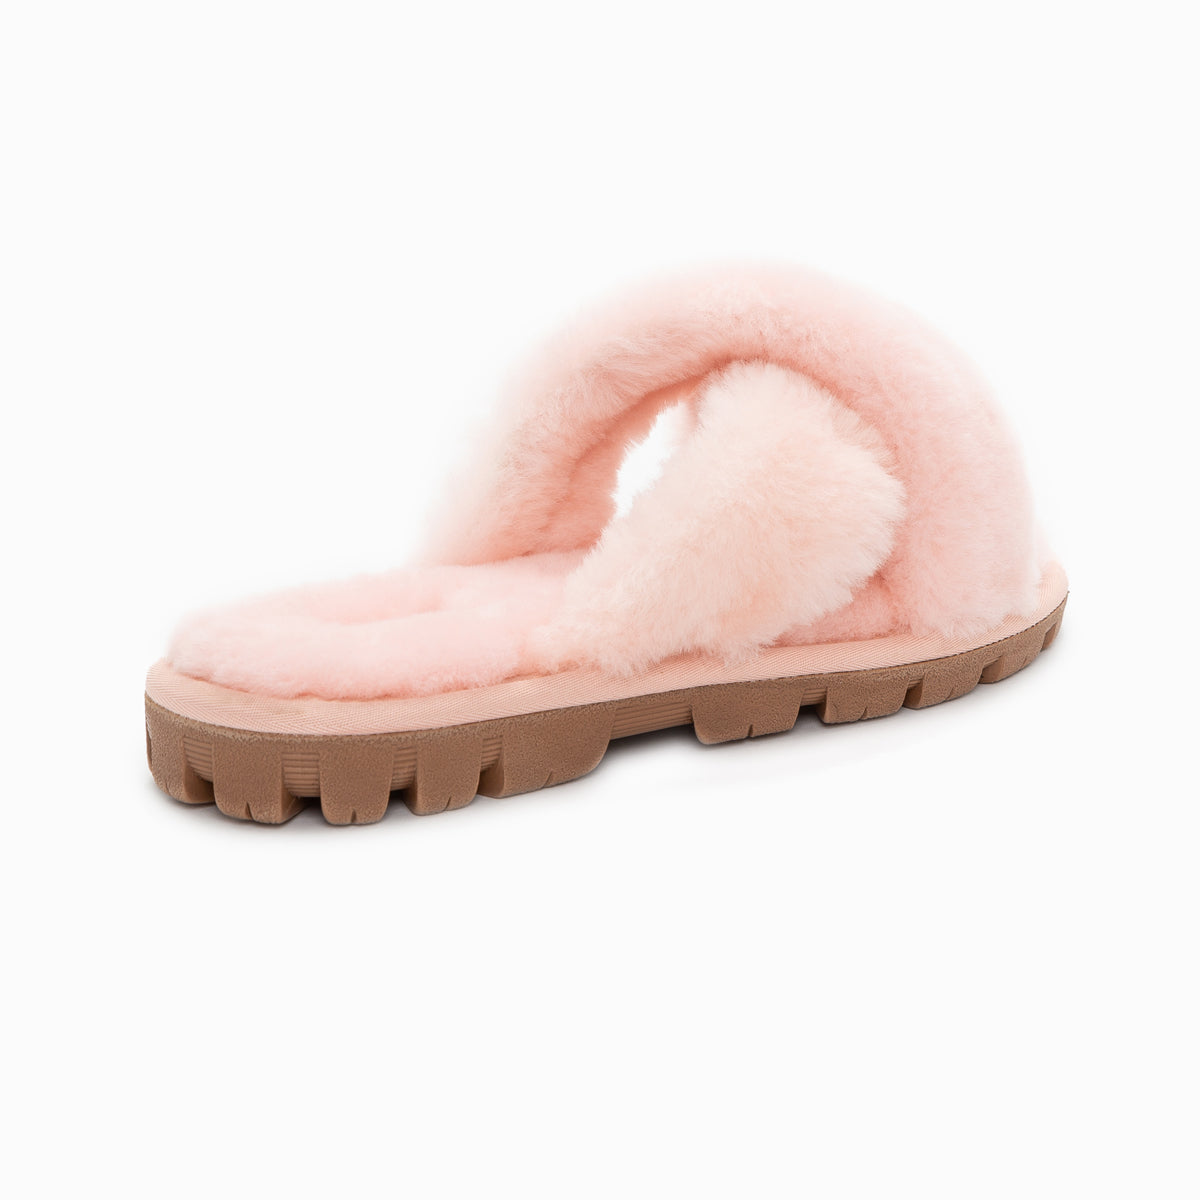 Ugg Premium Cross Over Slippers-Slippers-PEROZ Accessories